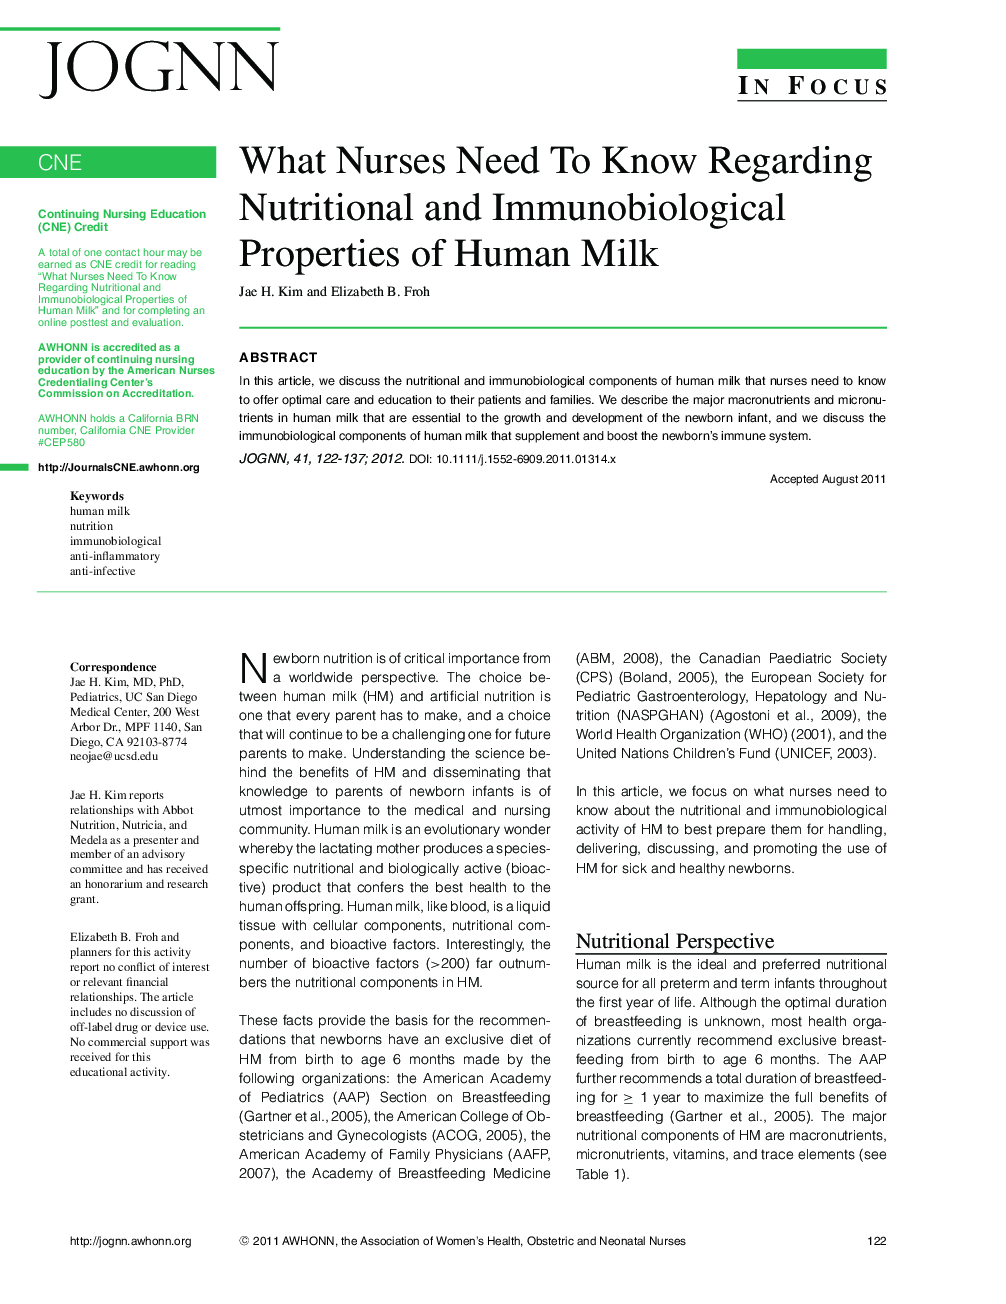 What Nurses Need To Know Regarding Nutritional and Immunobiological Properties of Human Milk